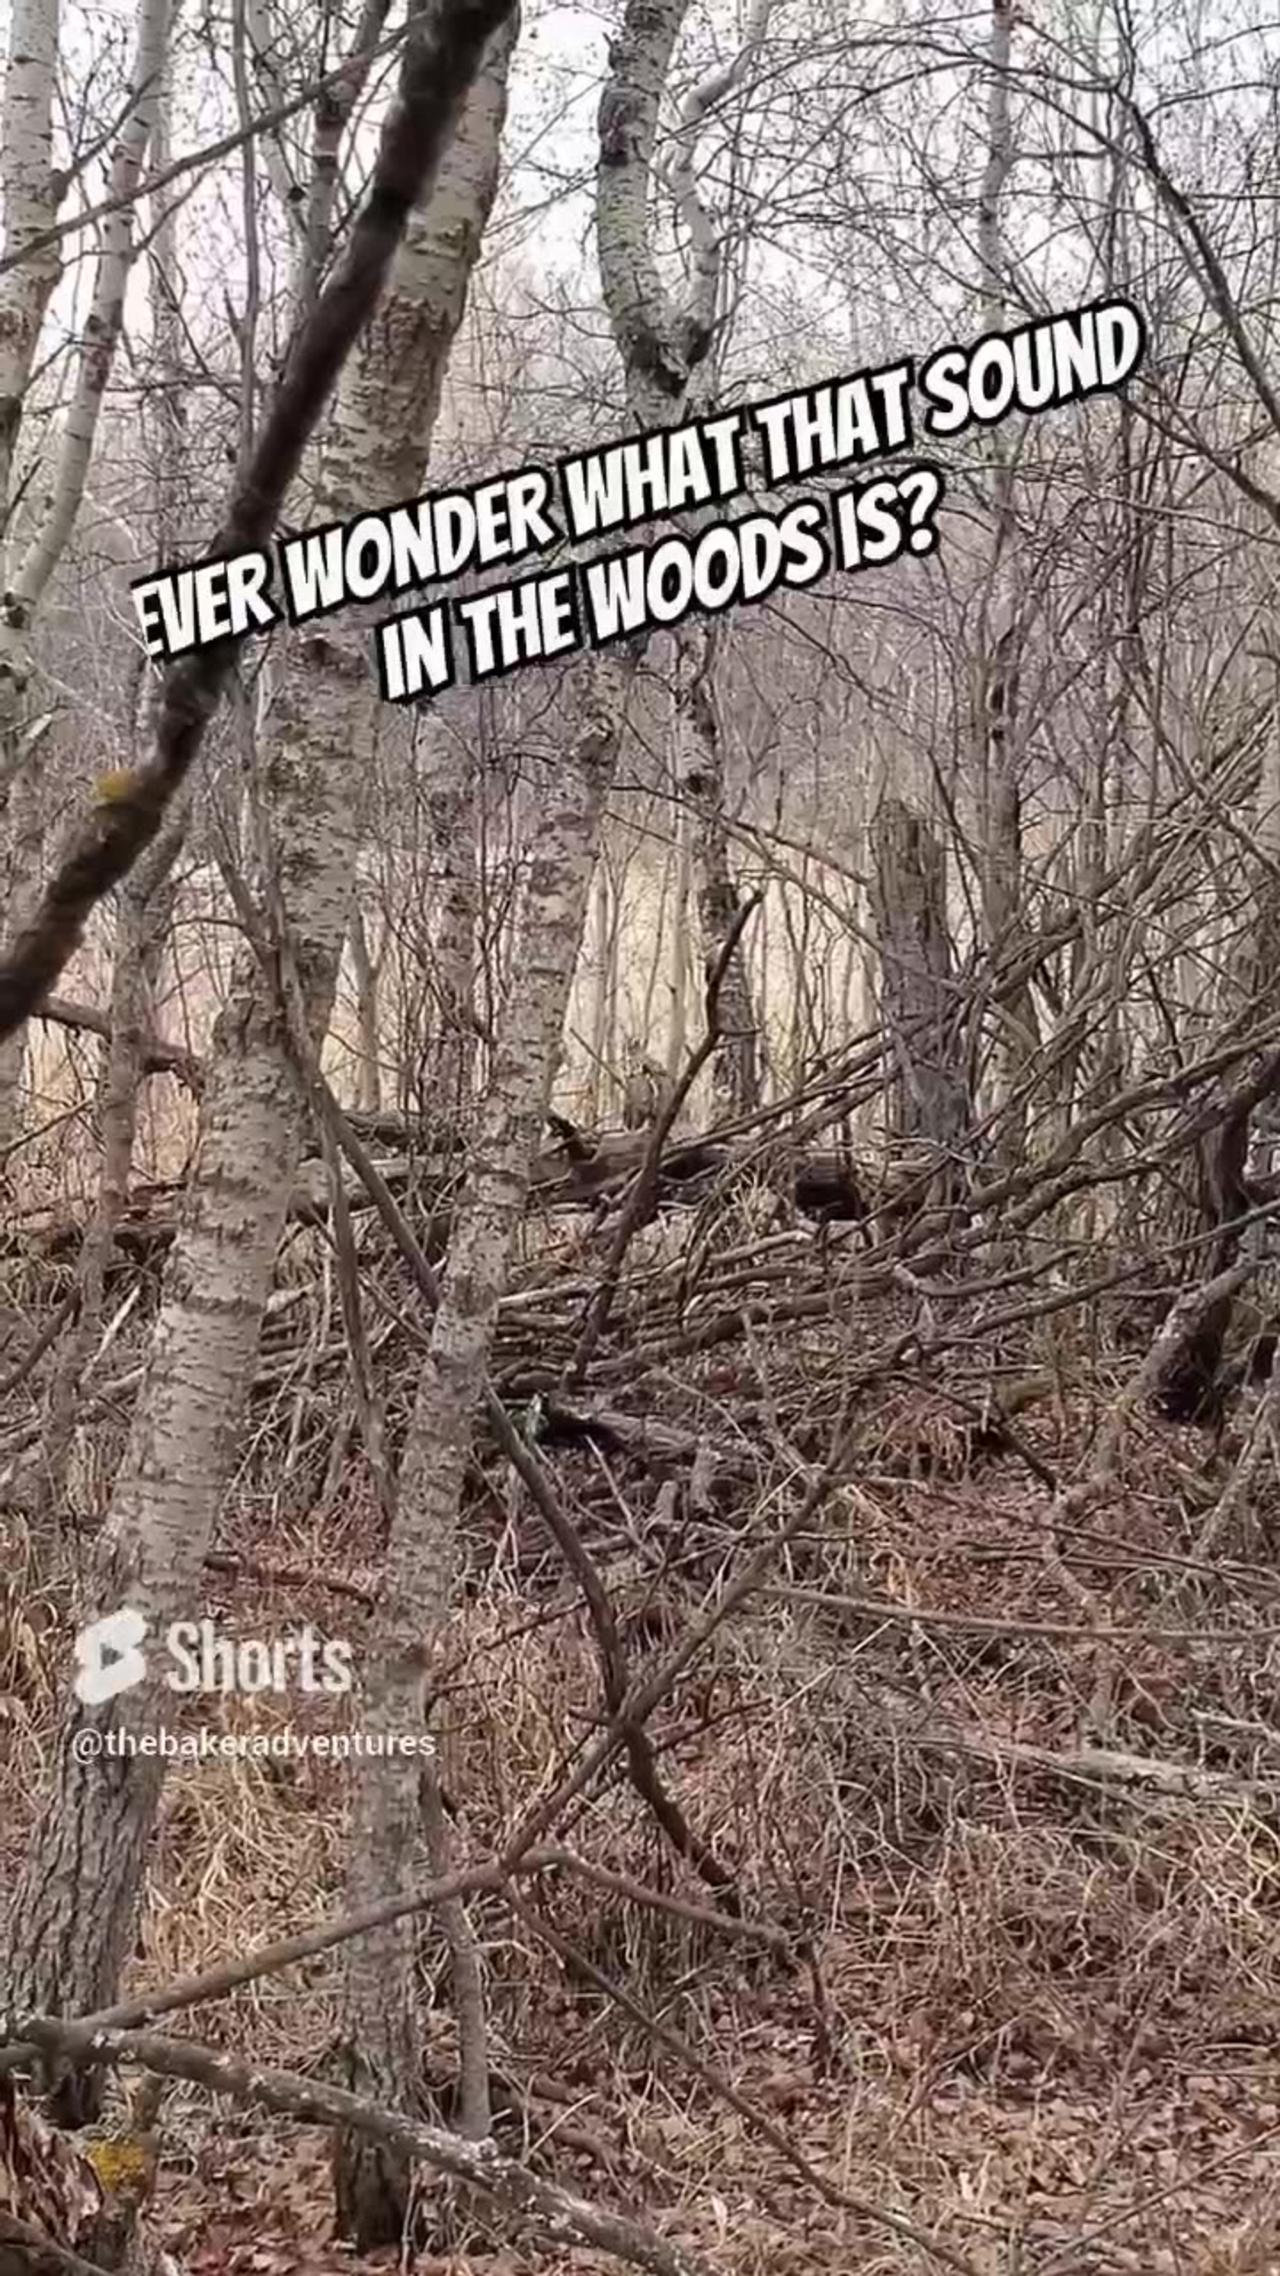 What's That Sound In The Woods?? #outdoors #woods #shorts #thebakeradventures